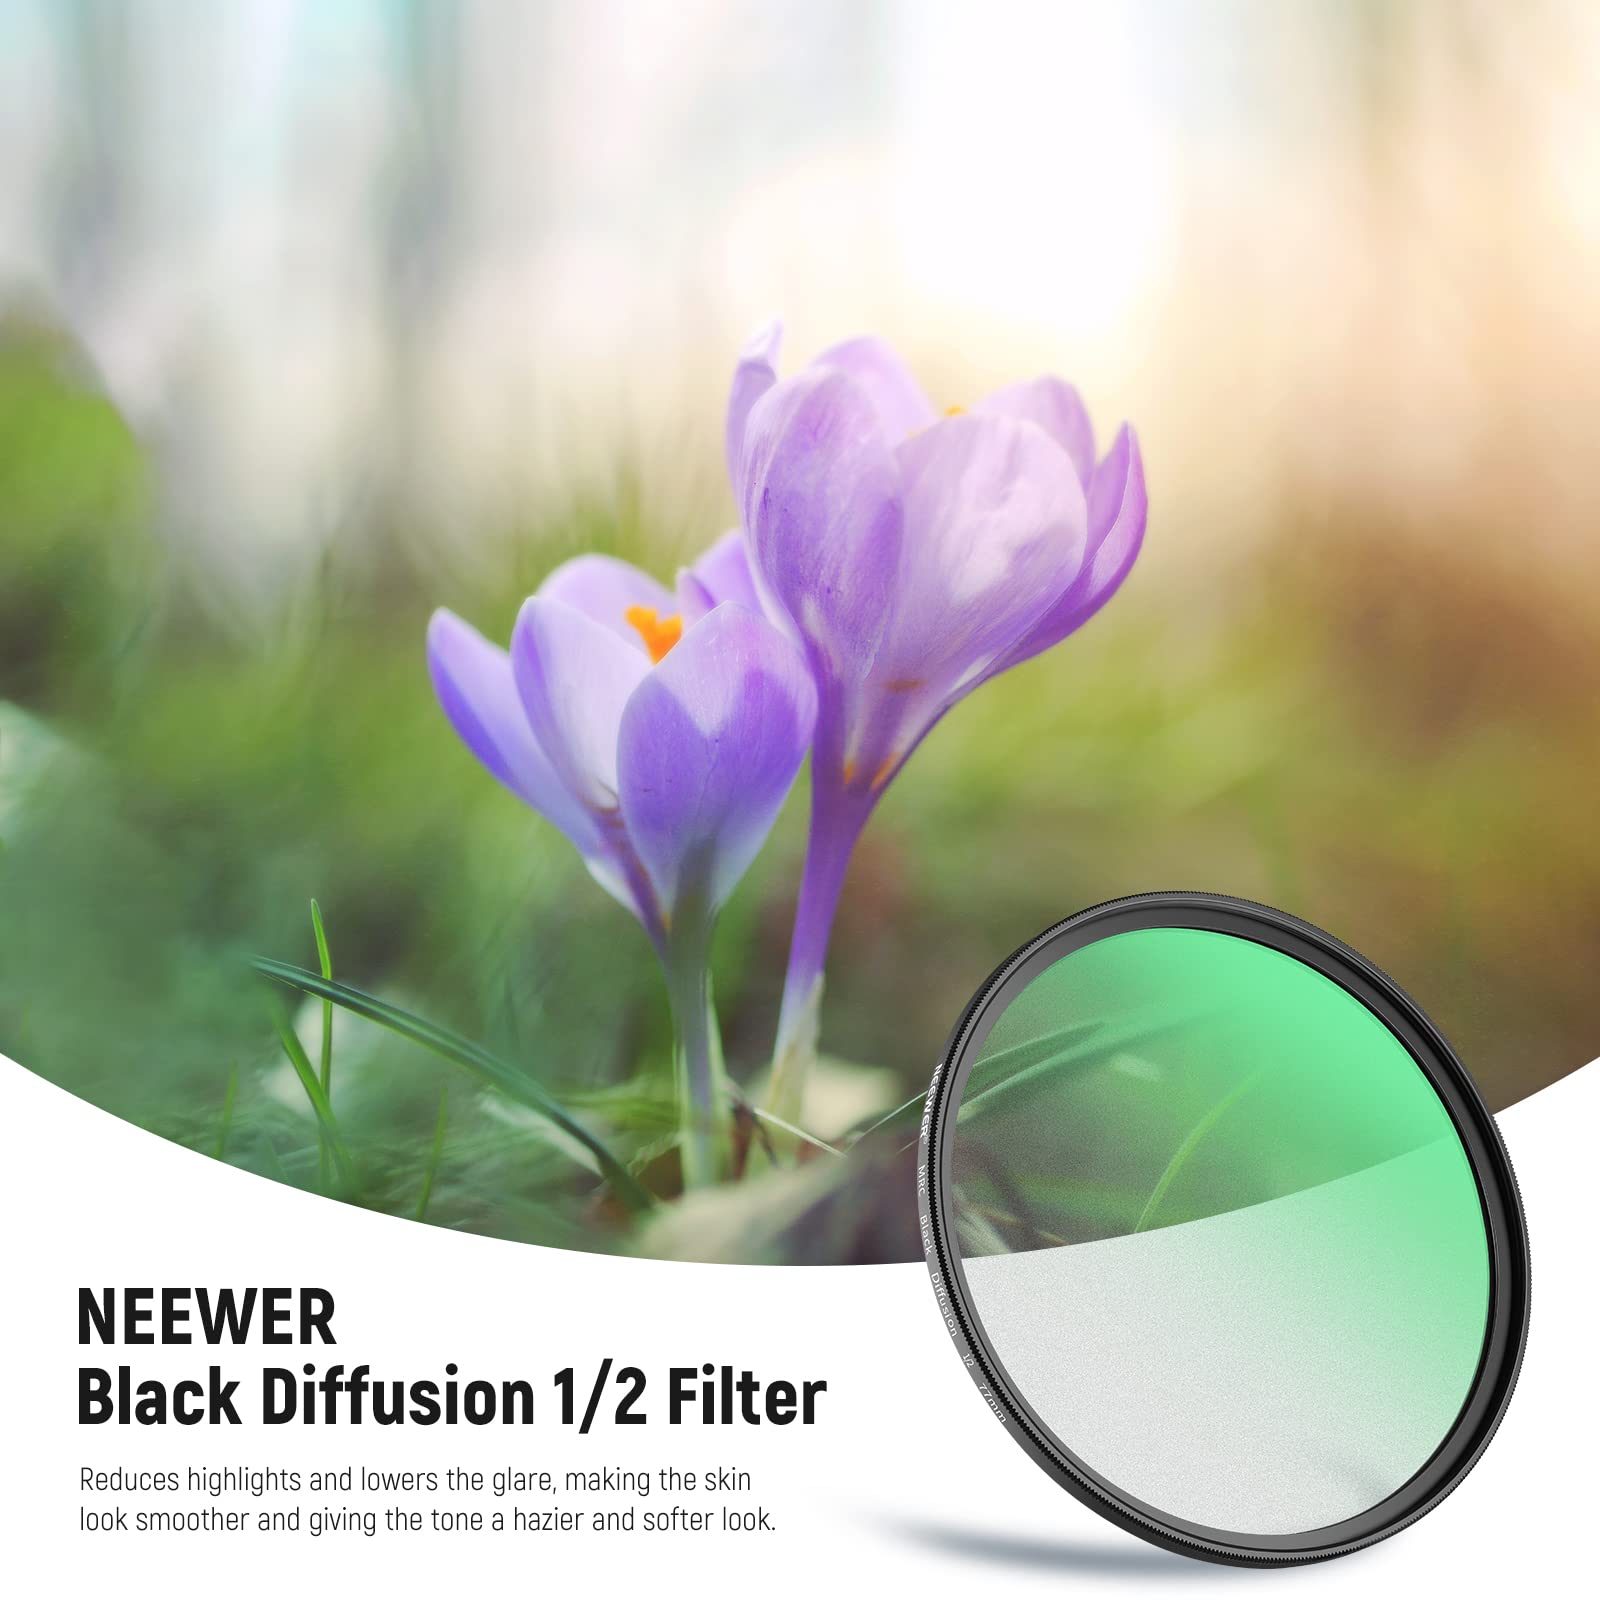 NEEWER 77mm Black Diffusion 1/2 Filter Mist Dreamy Cinematic Effect Filter Ultra Slim Water Repellent Scratch Resistant HD Optical Glass, 30 Layers Nano Coatings for Video/Vlog/Portrait Photography